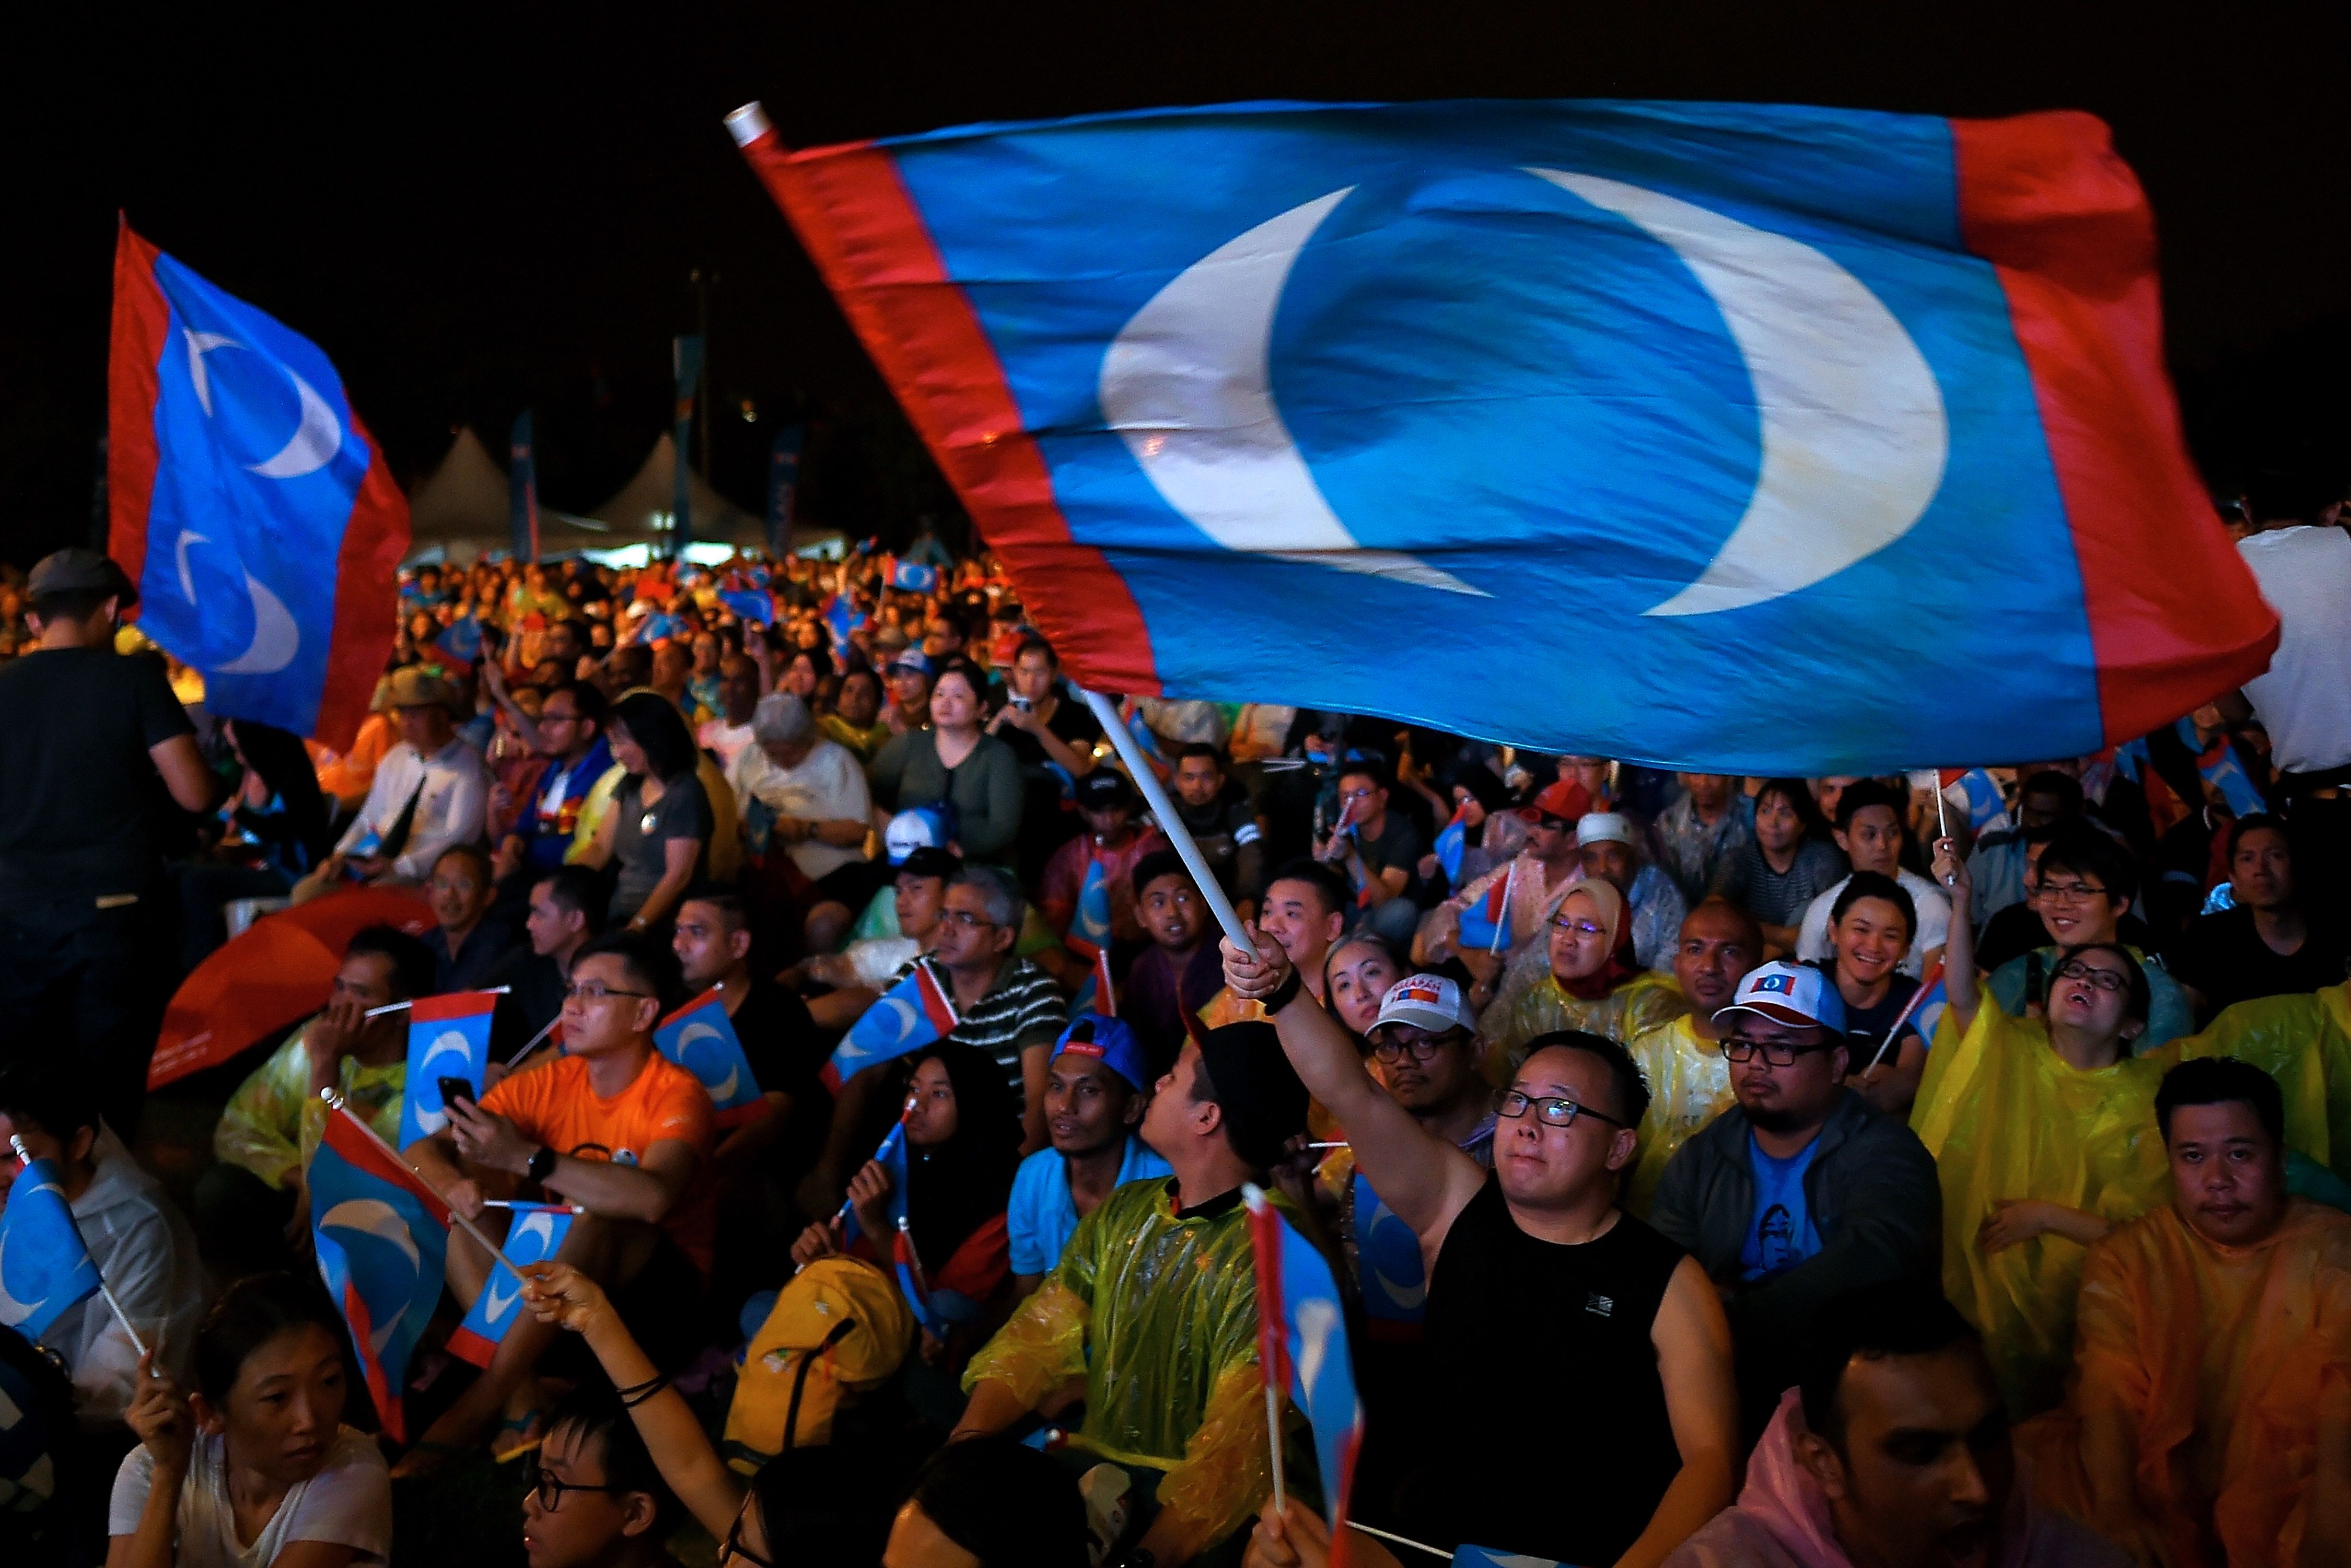 Supporters of former Malaysian prime minister and opposition party Pakatan Harapan's candidate Mahathir Mohamad attend a campaign rally ahead of the upcoming general elections to be held on May 9. (Manan Vatsyayan—AFP/Getty Images)